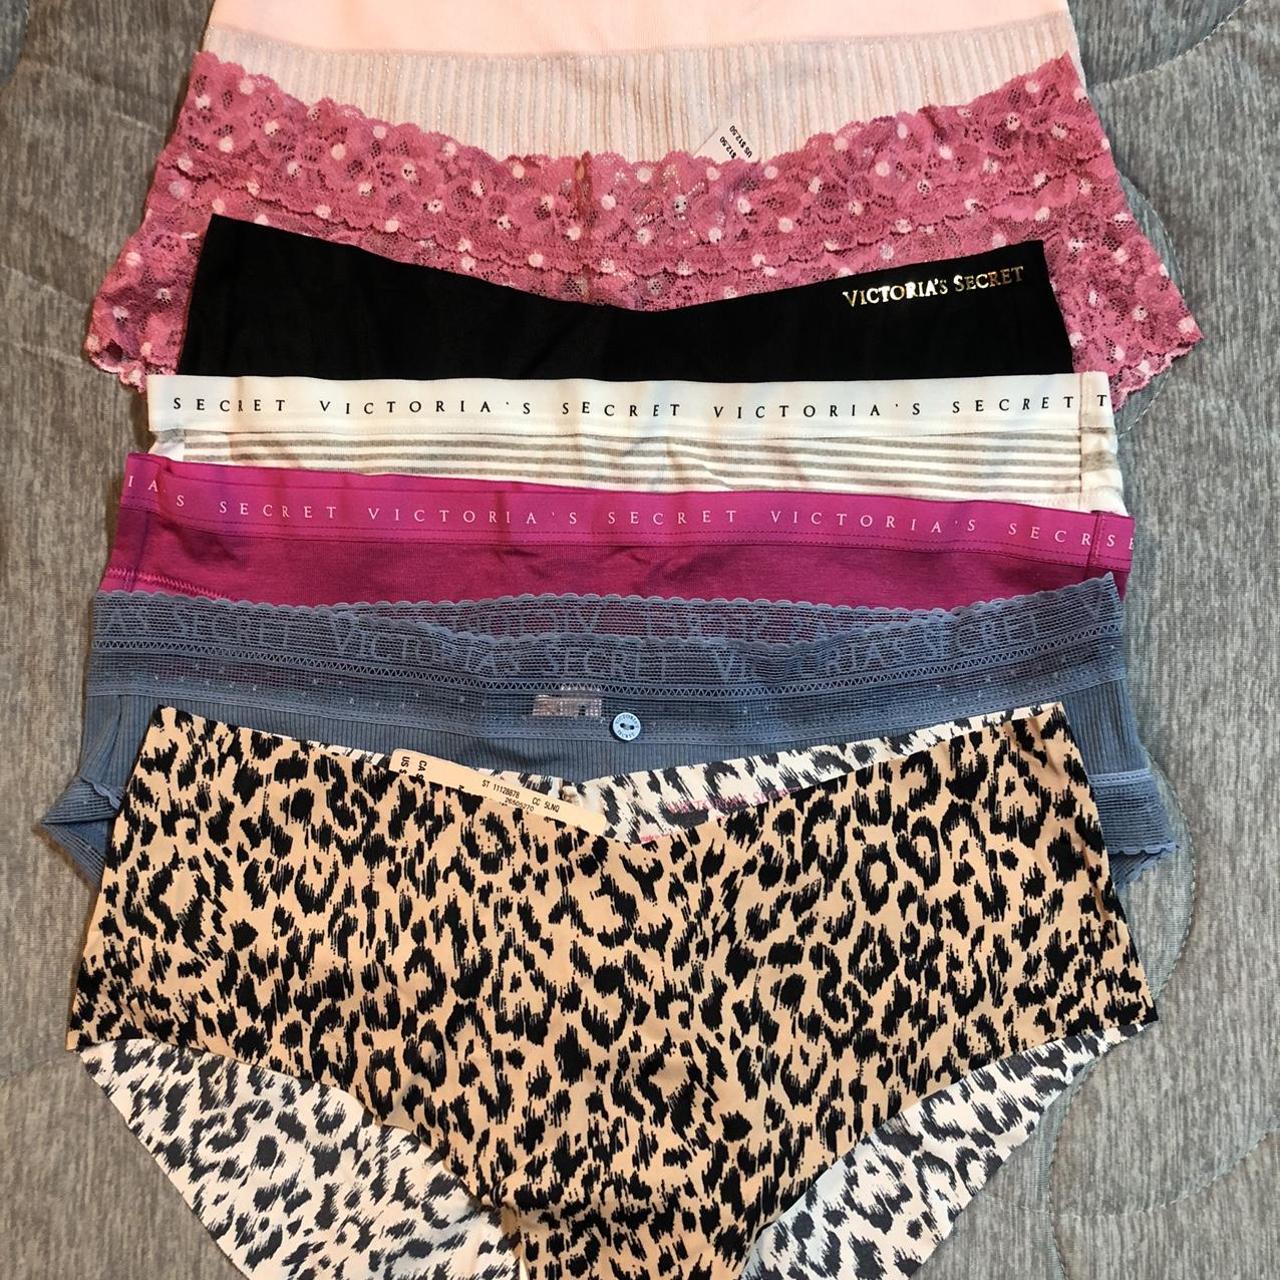 New with tags Victoria secret panties, Size Small, 7